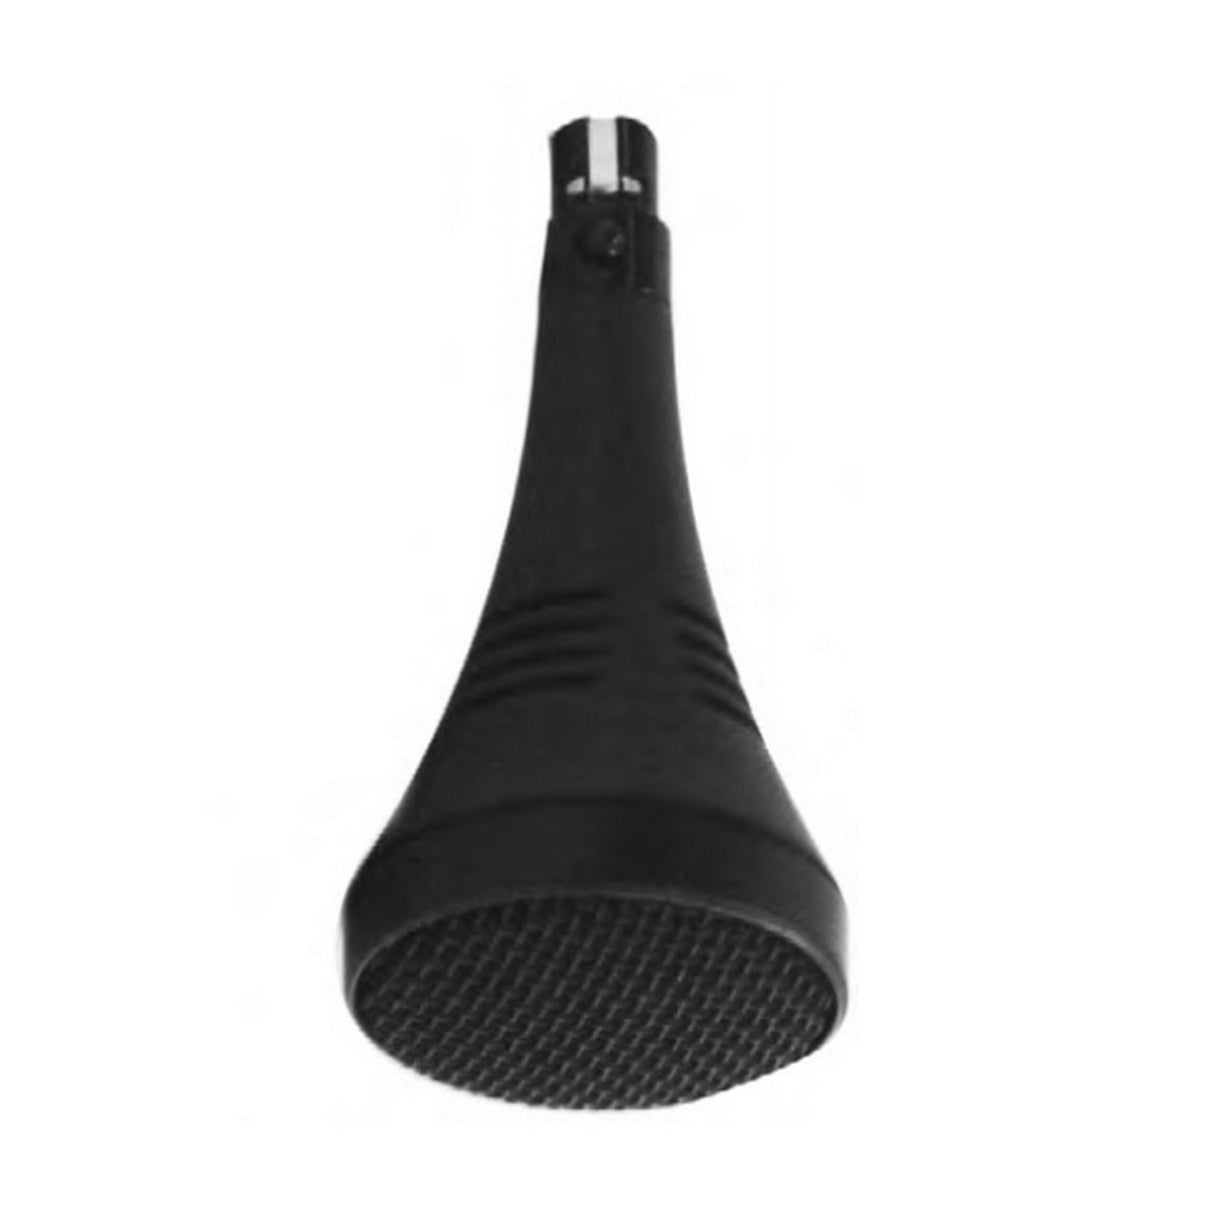 ClearOne Ceiling Microphone Array Kit for INTERACT AT, Black